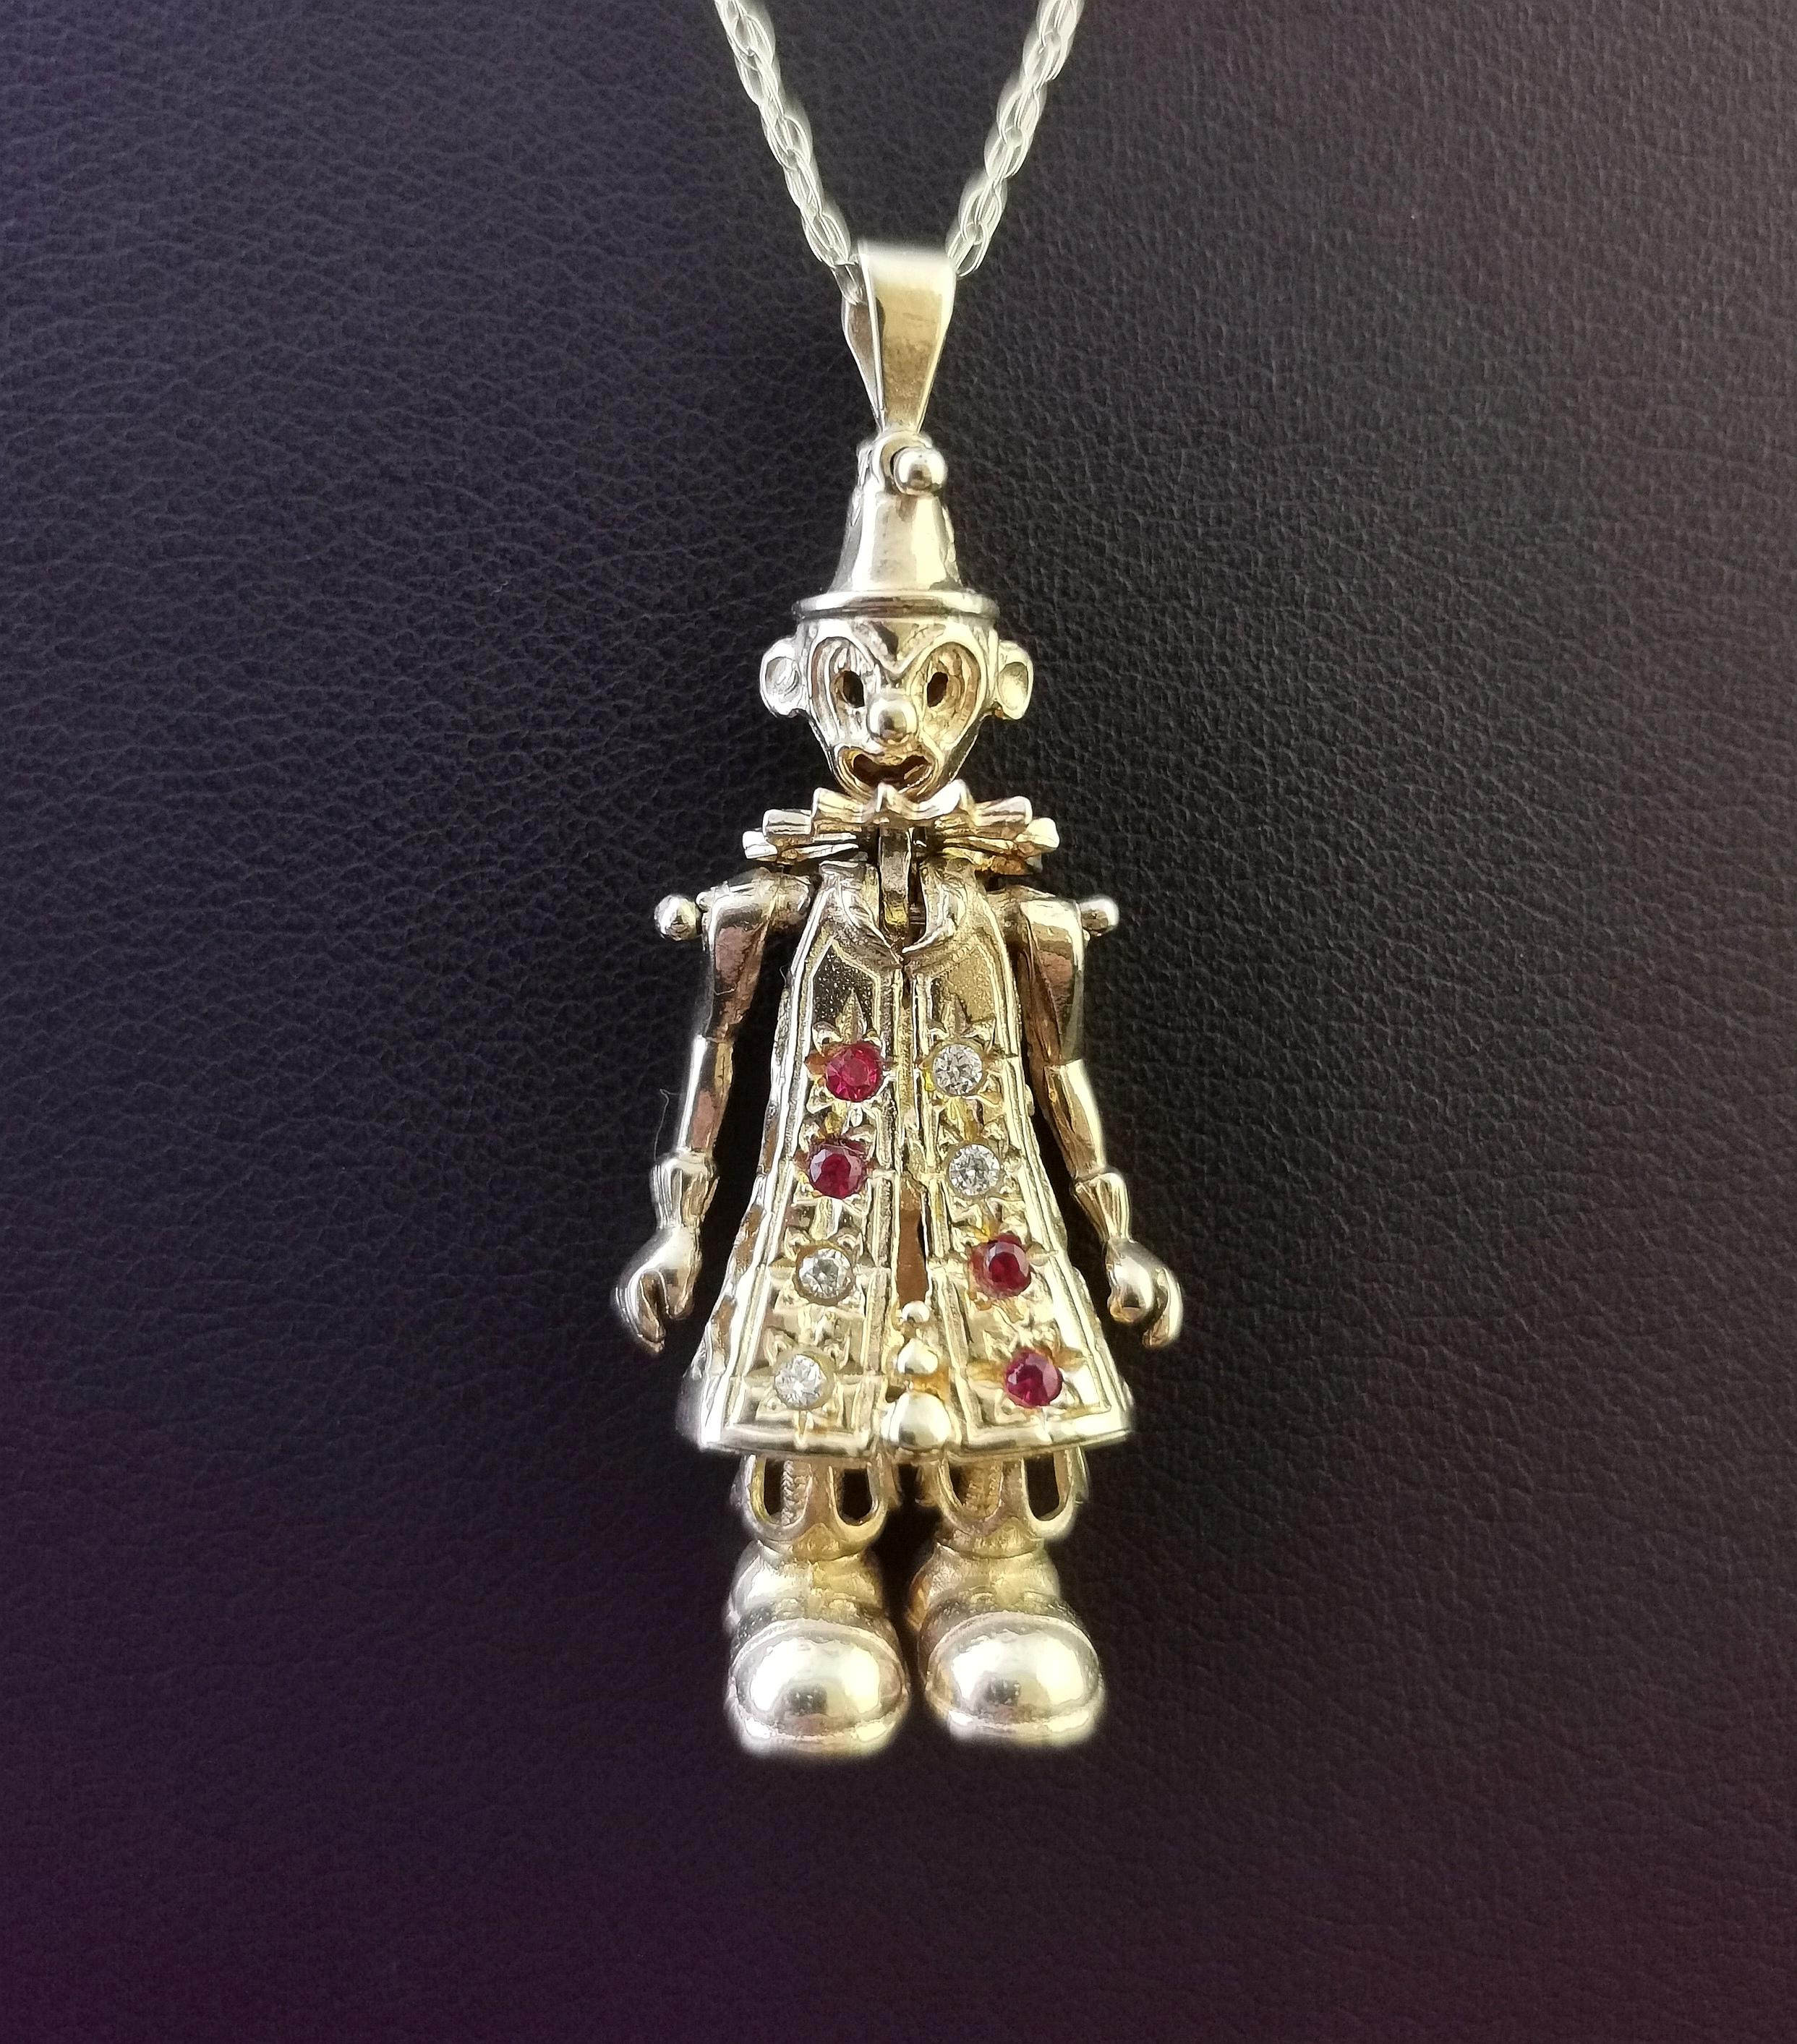 A fantastic vintage 9kt yellow gold articulated clown pendant.

A classic favourite from the 90s this clown pendant has movable limbs and is set with red paste and cubic zirconia stones to the front.

A great novelty piece, it comes on a fine link